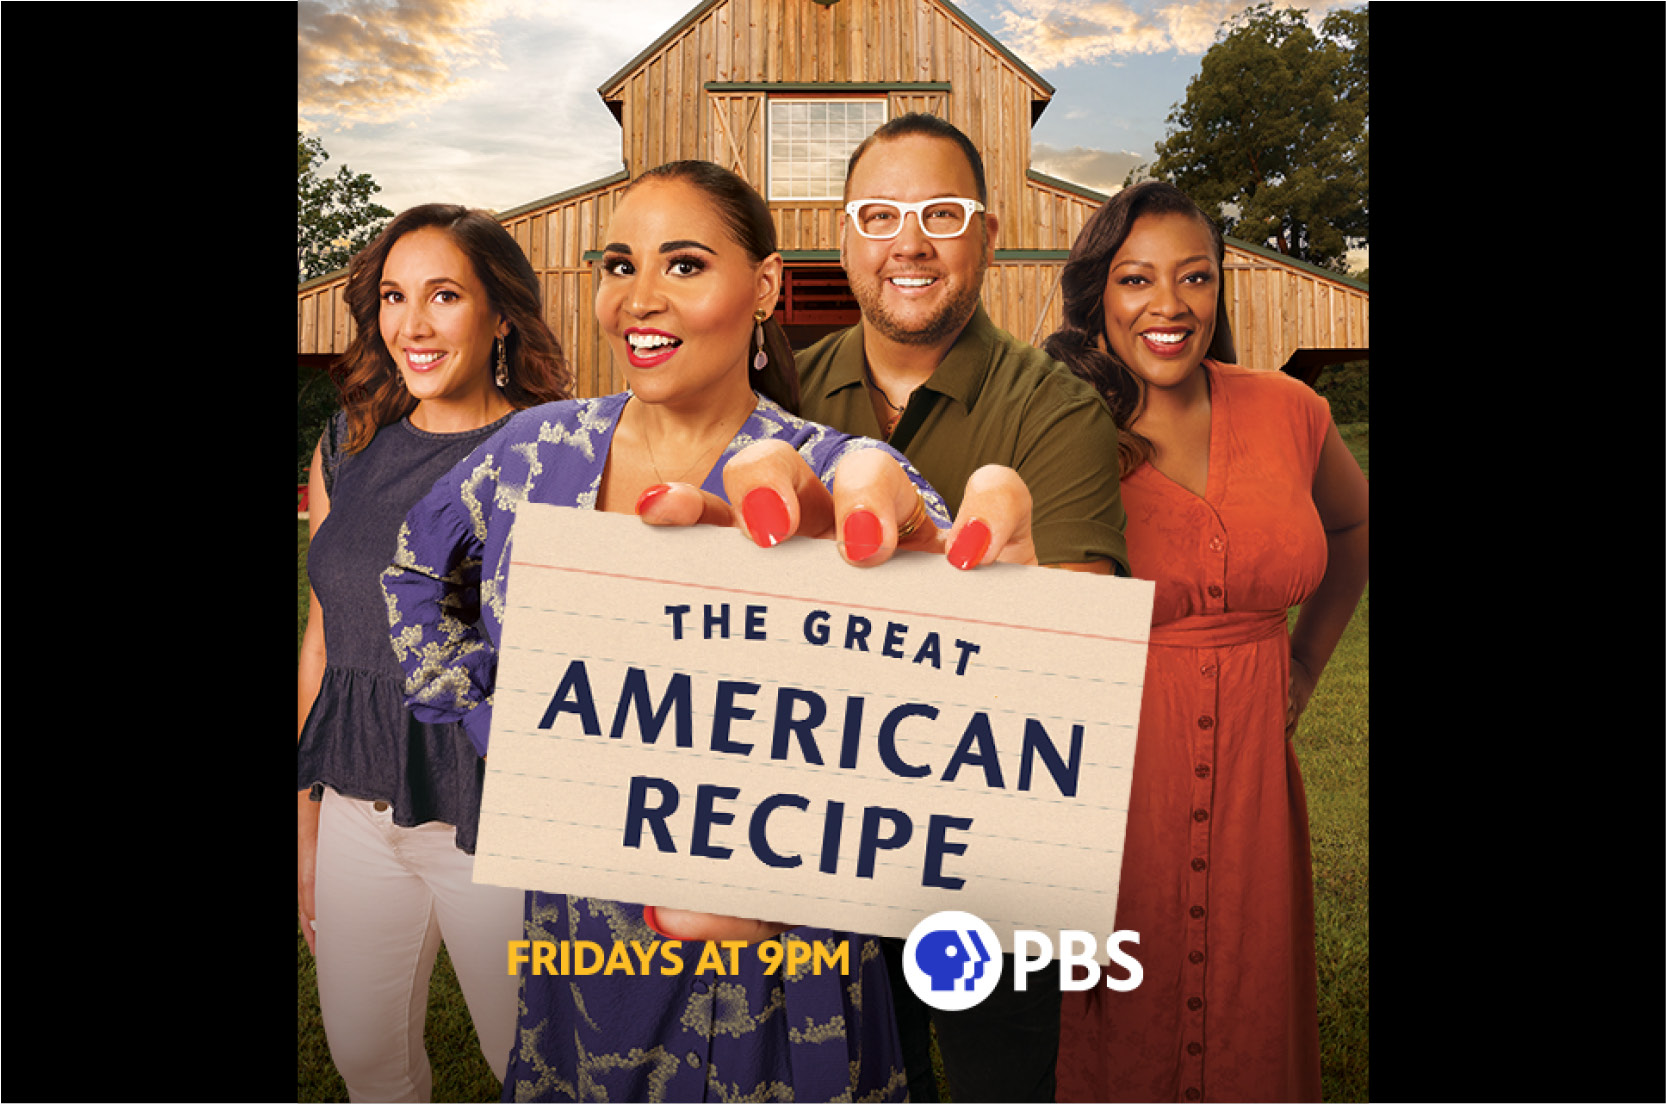 The Great American Recipe. Fridays at 9pm on PBS